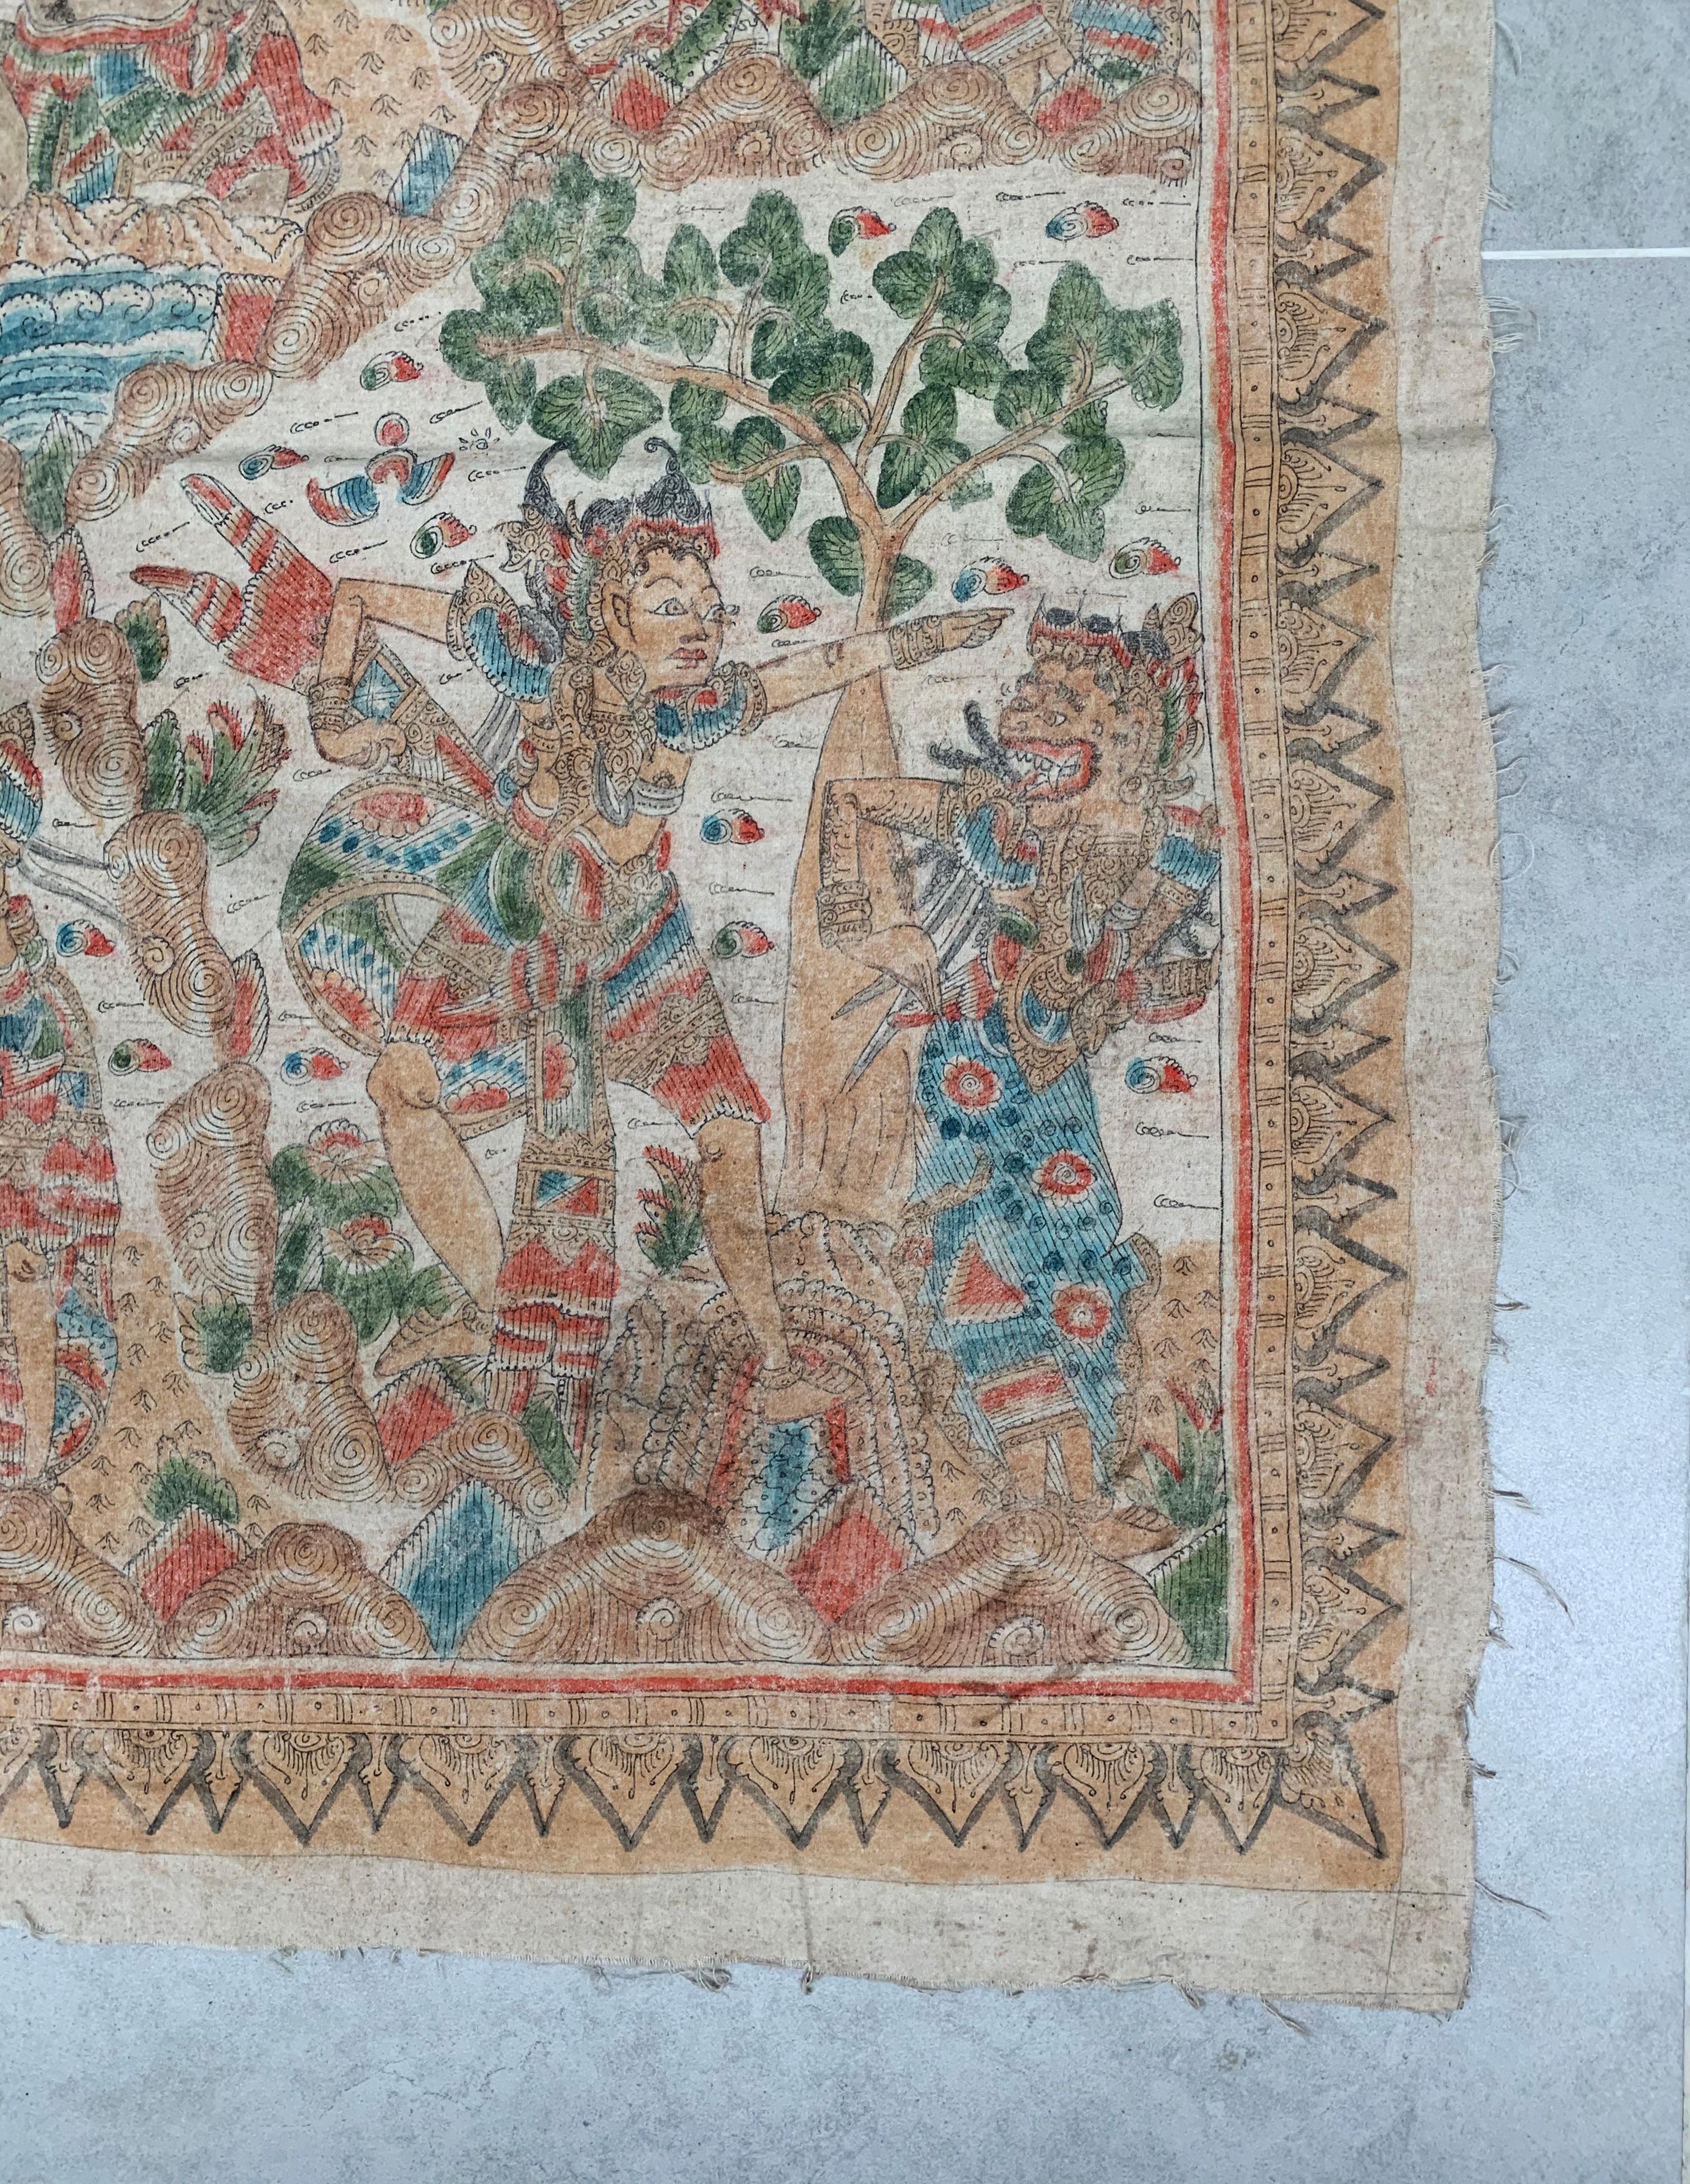 Hand-Painted Bali Hindu Textile 'Kamasan' Painting, Indonesia, Early 20th Century For Sale